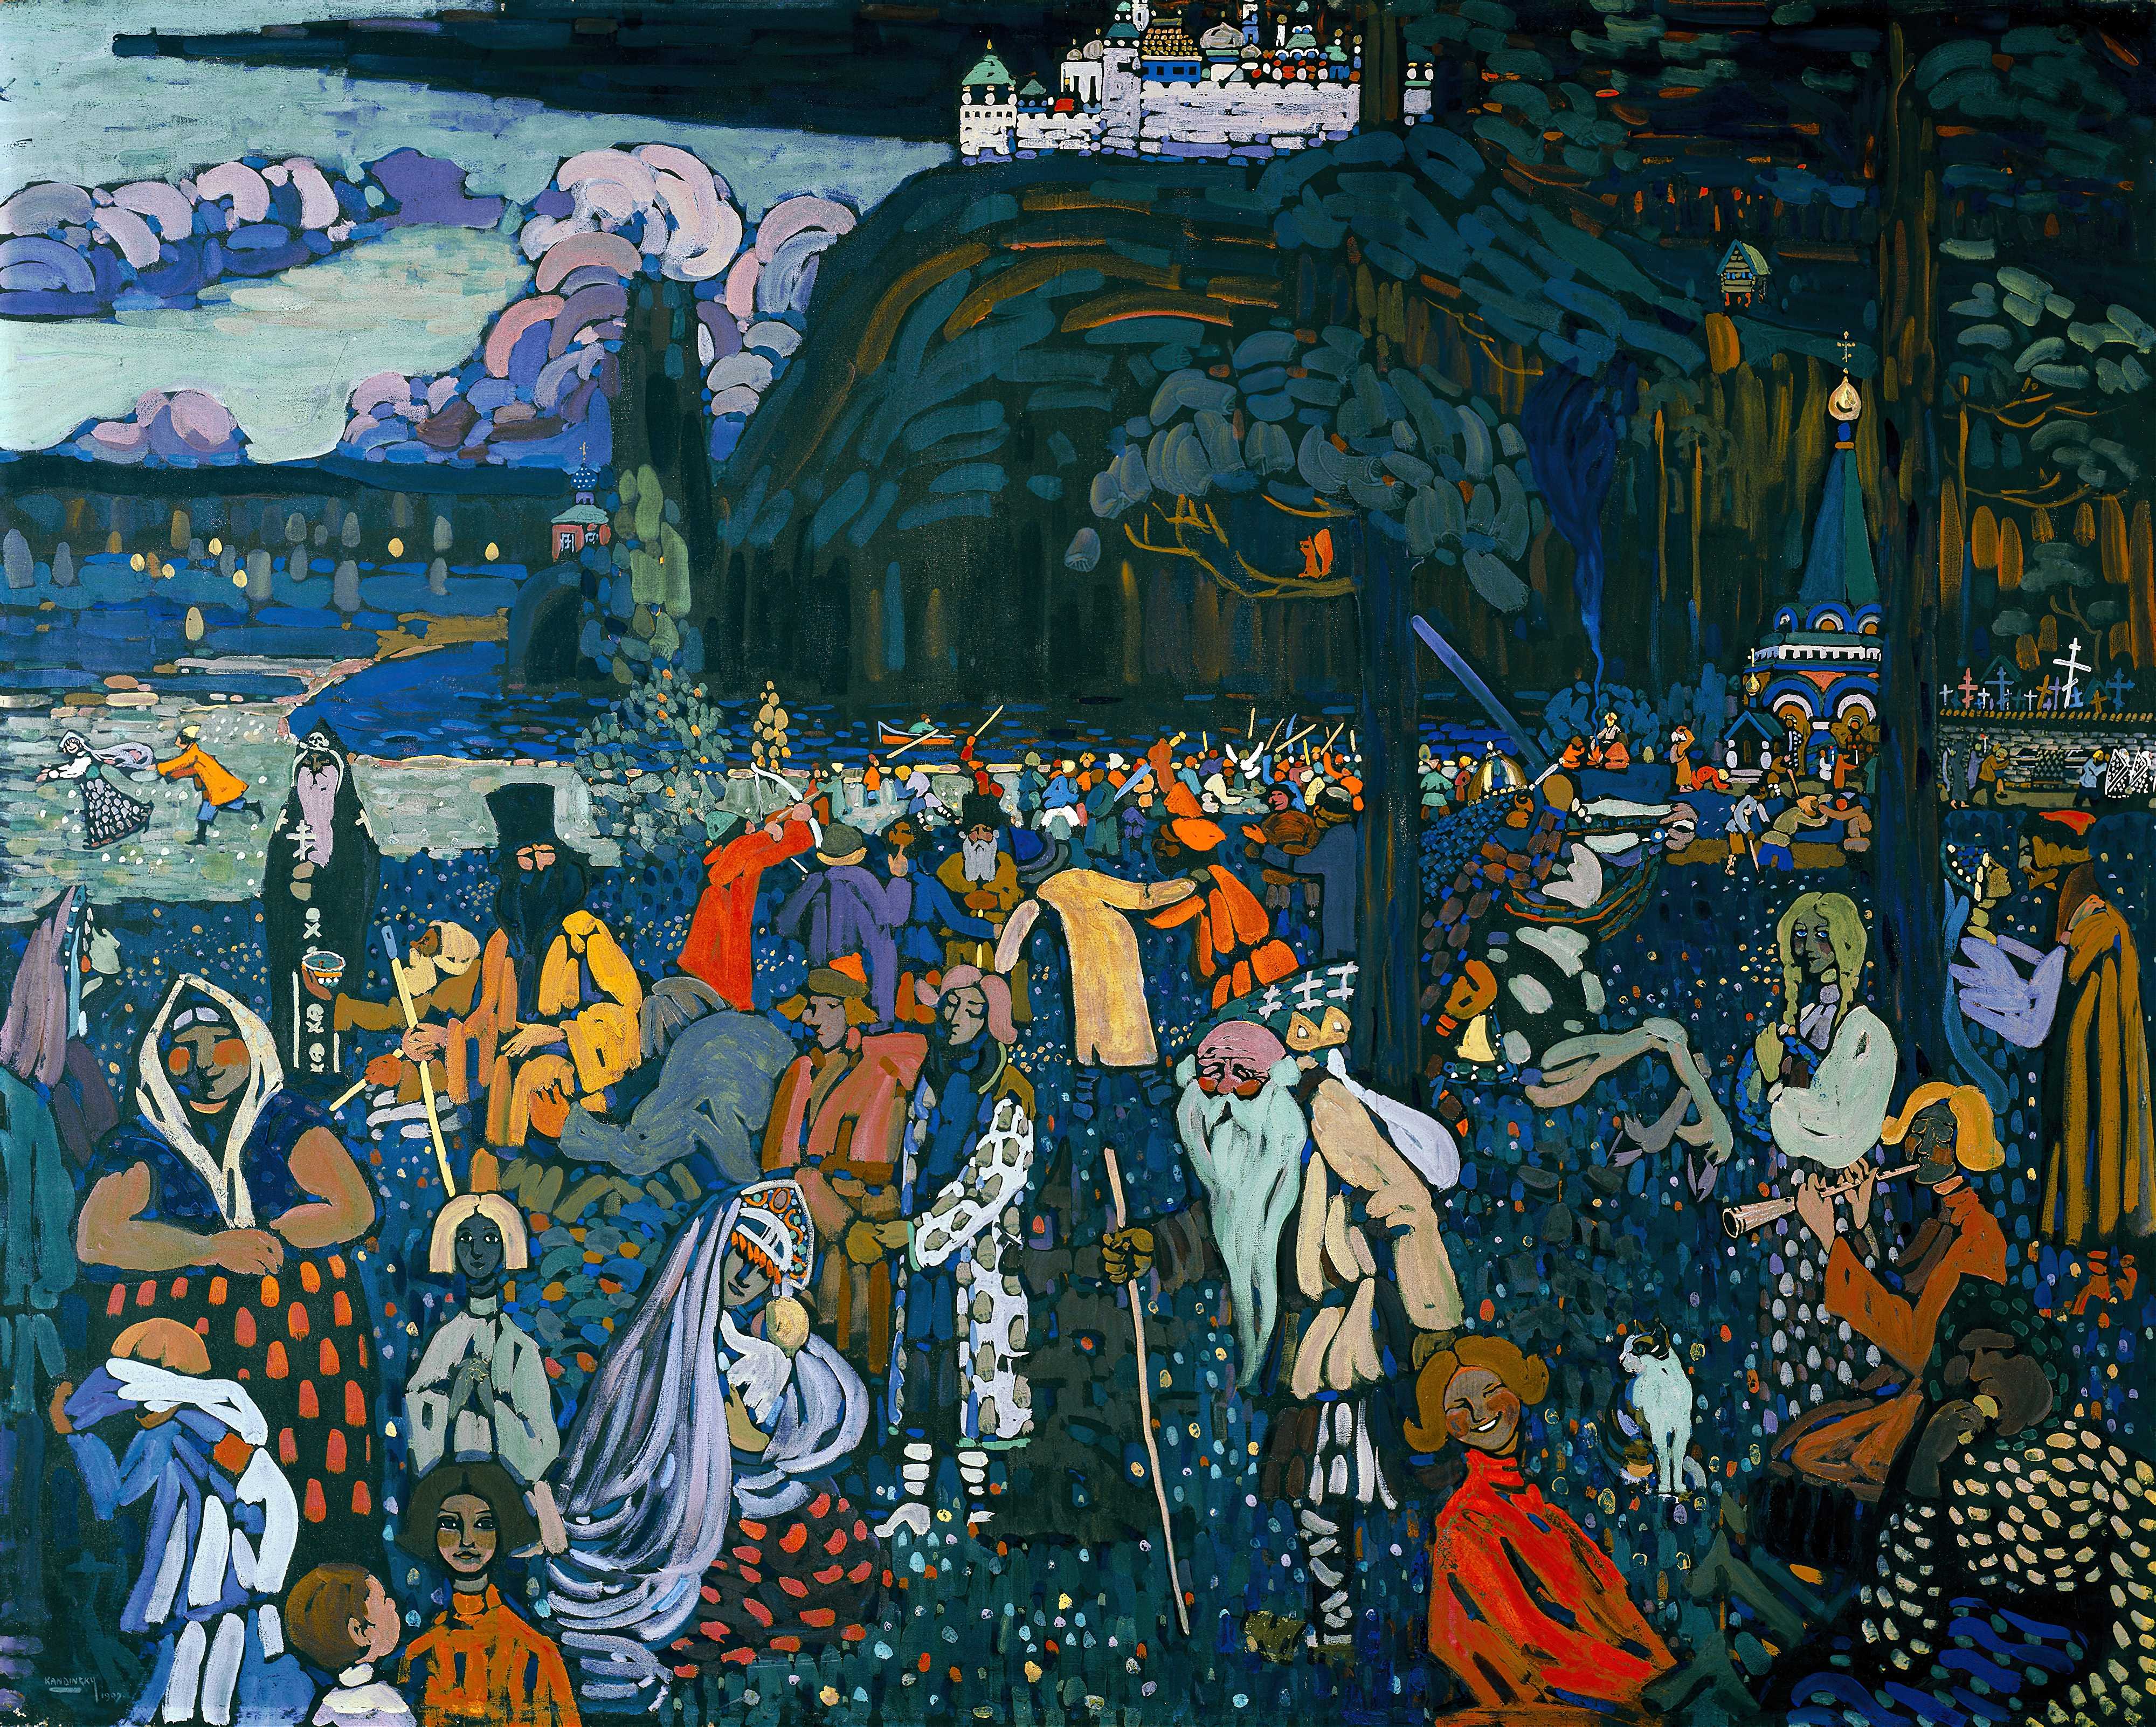 Find out more about Wassily Kandinsky - The Colorful Life